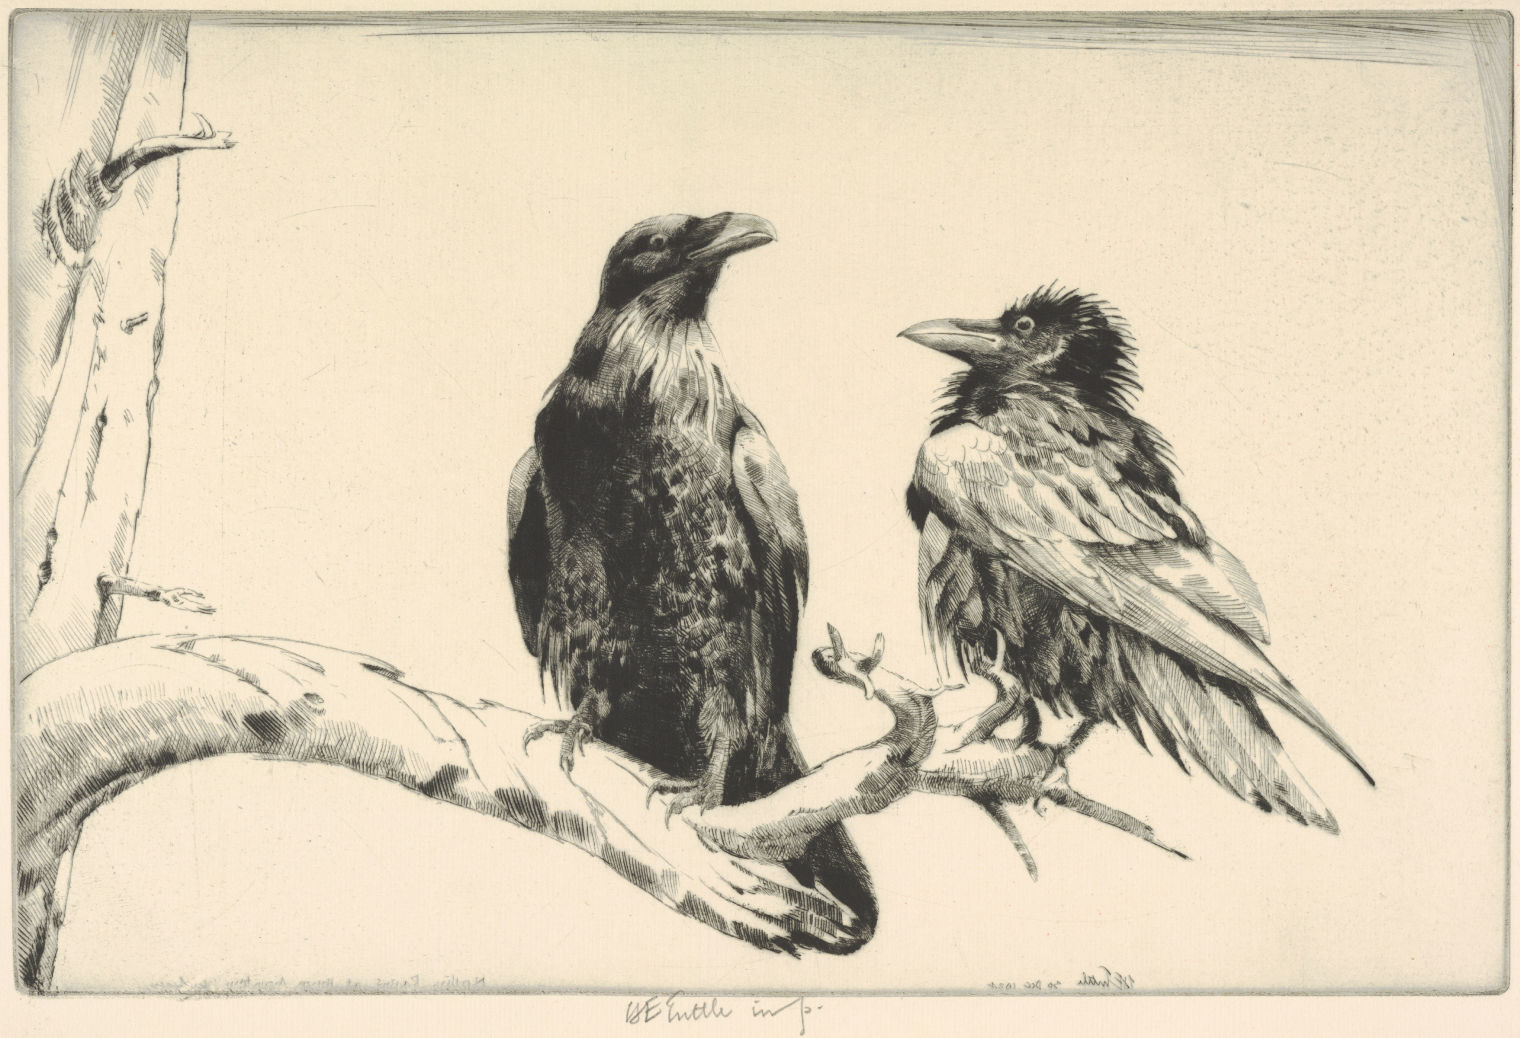 Drypoint of two ravens on a branch, looking towards each other